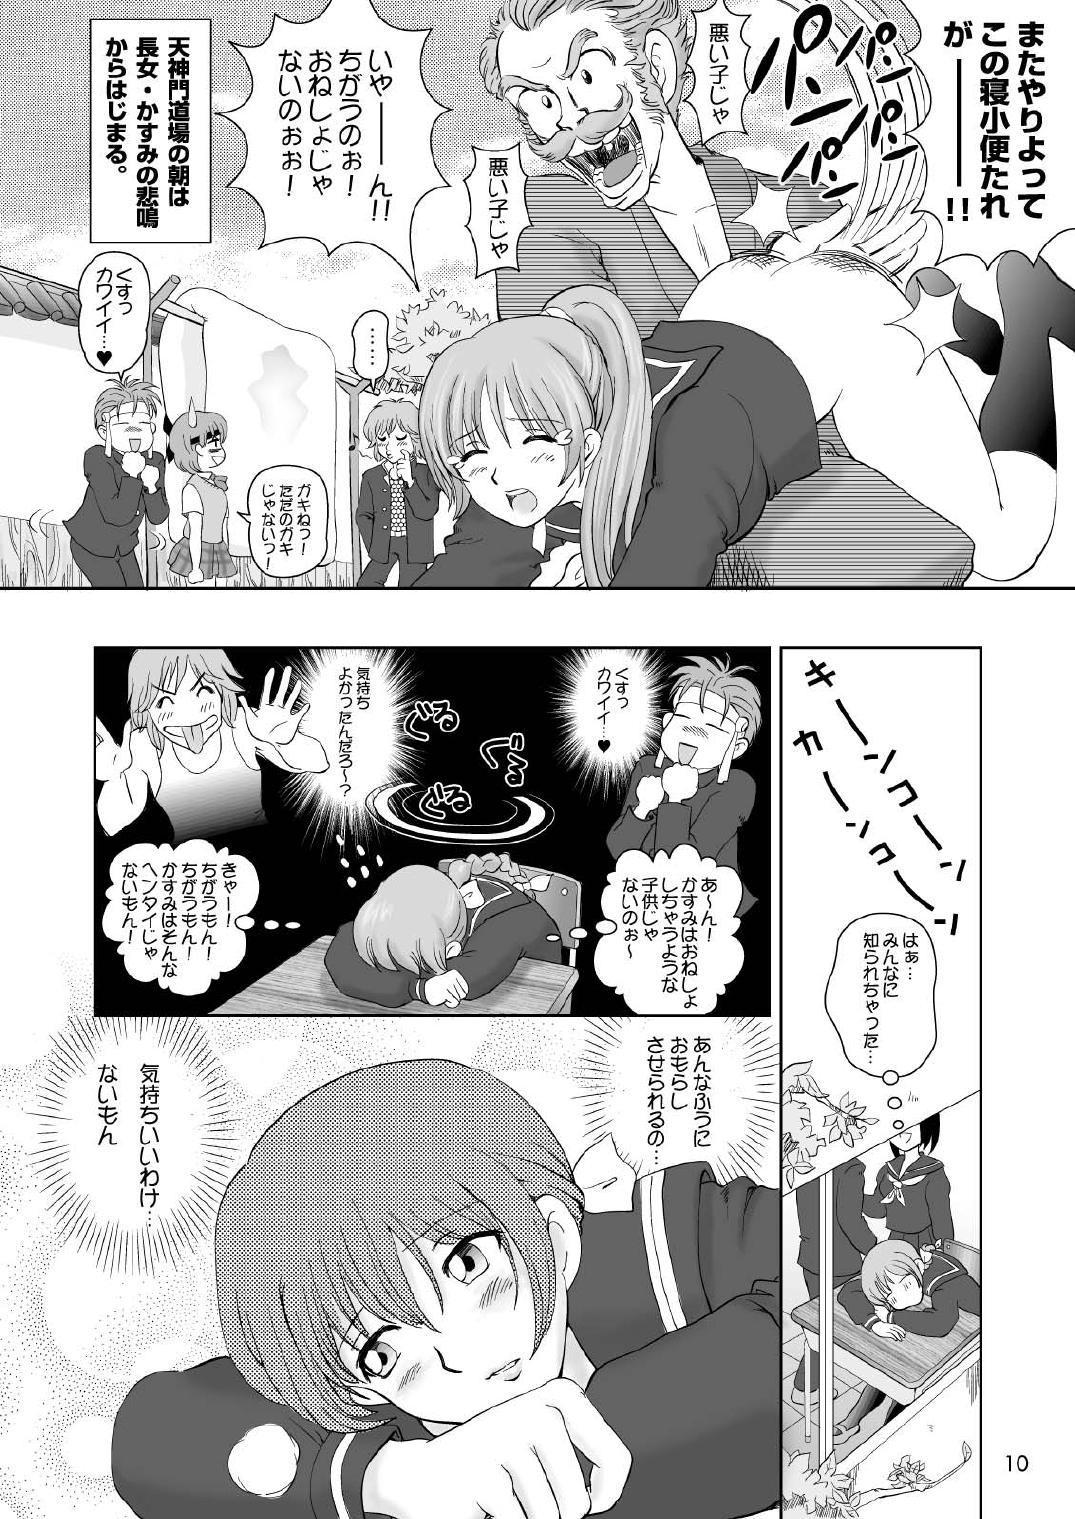 Mask Sugoiyo!! Kasumi-chan 2 - Dead or alive Free Amateur - Page 10